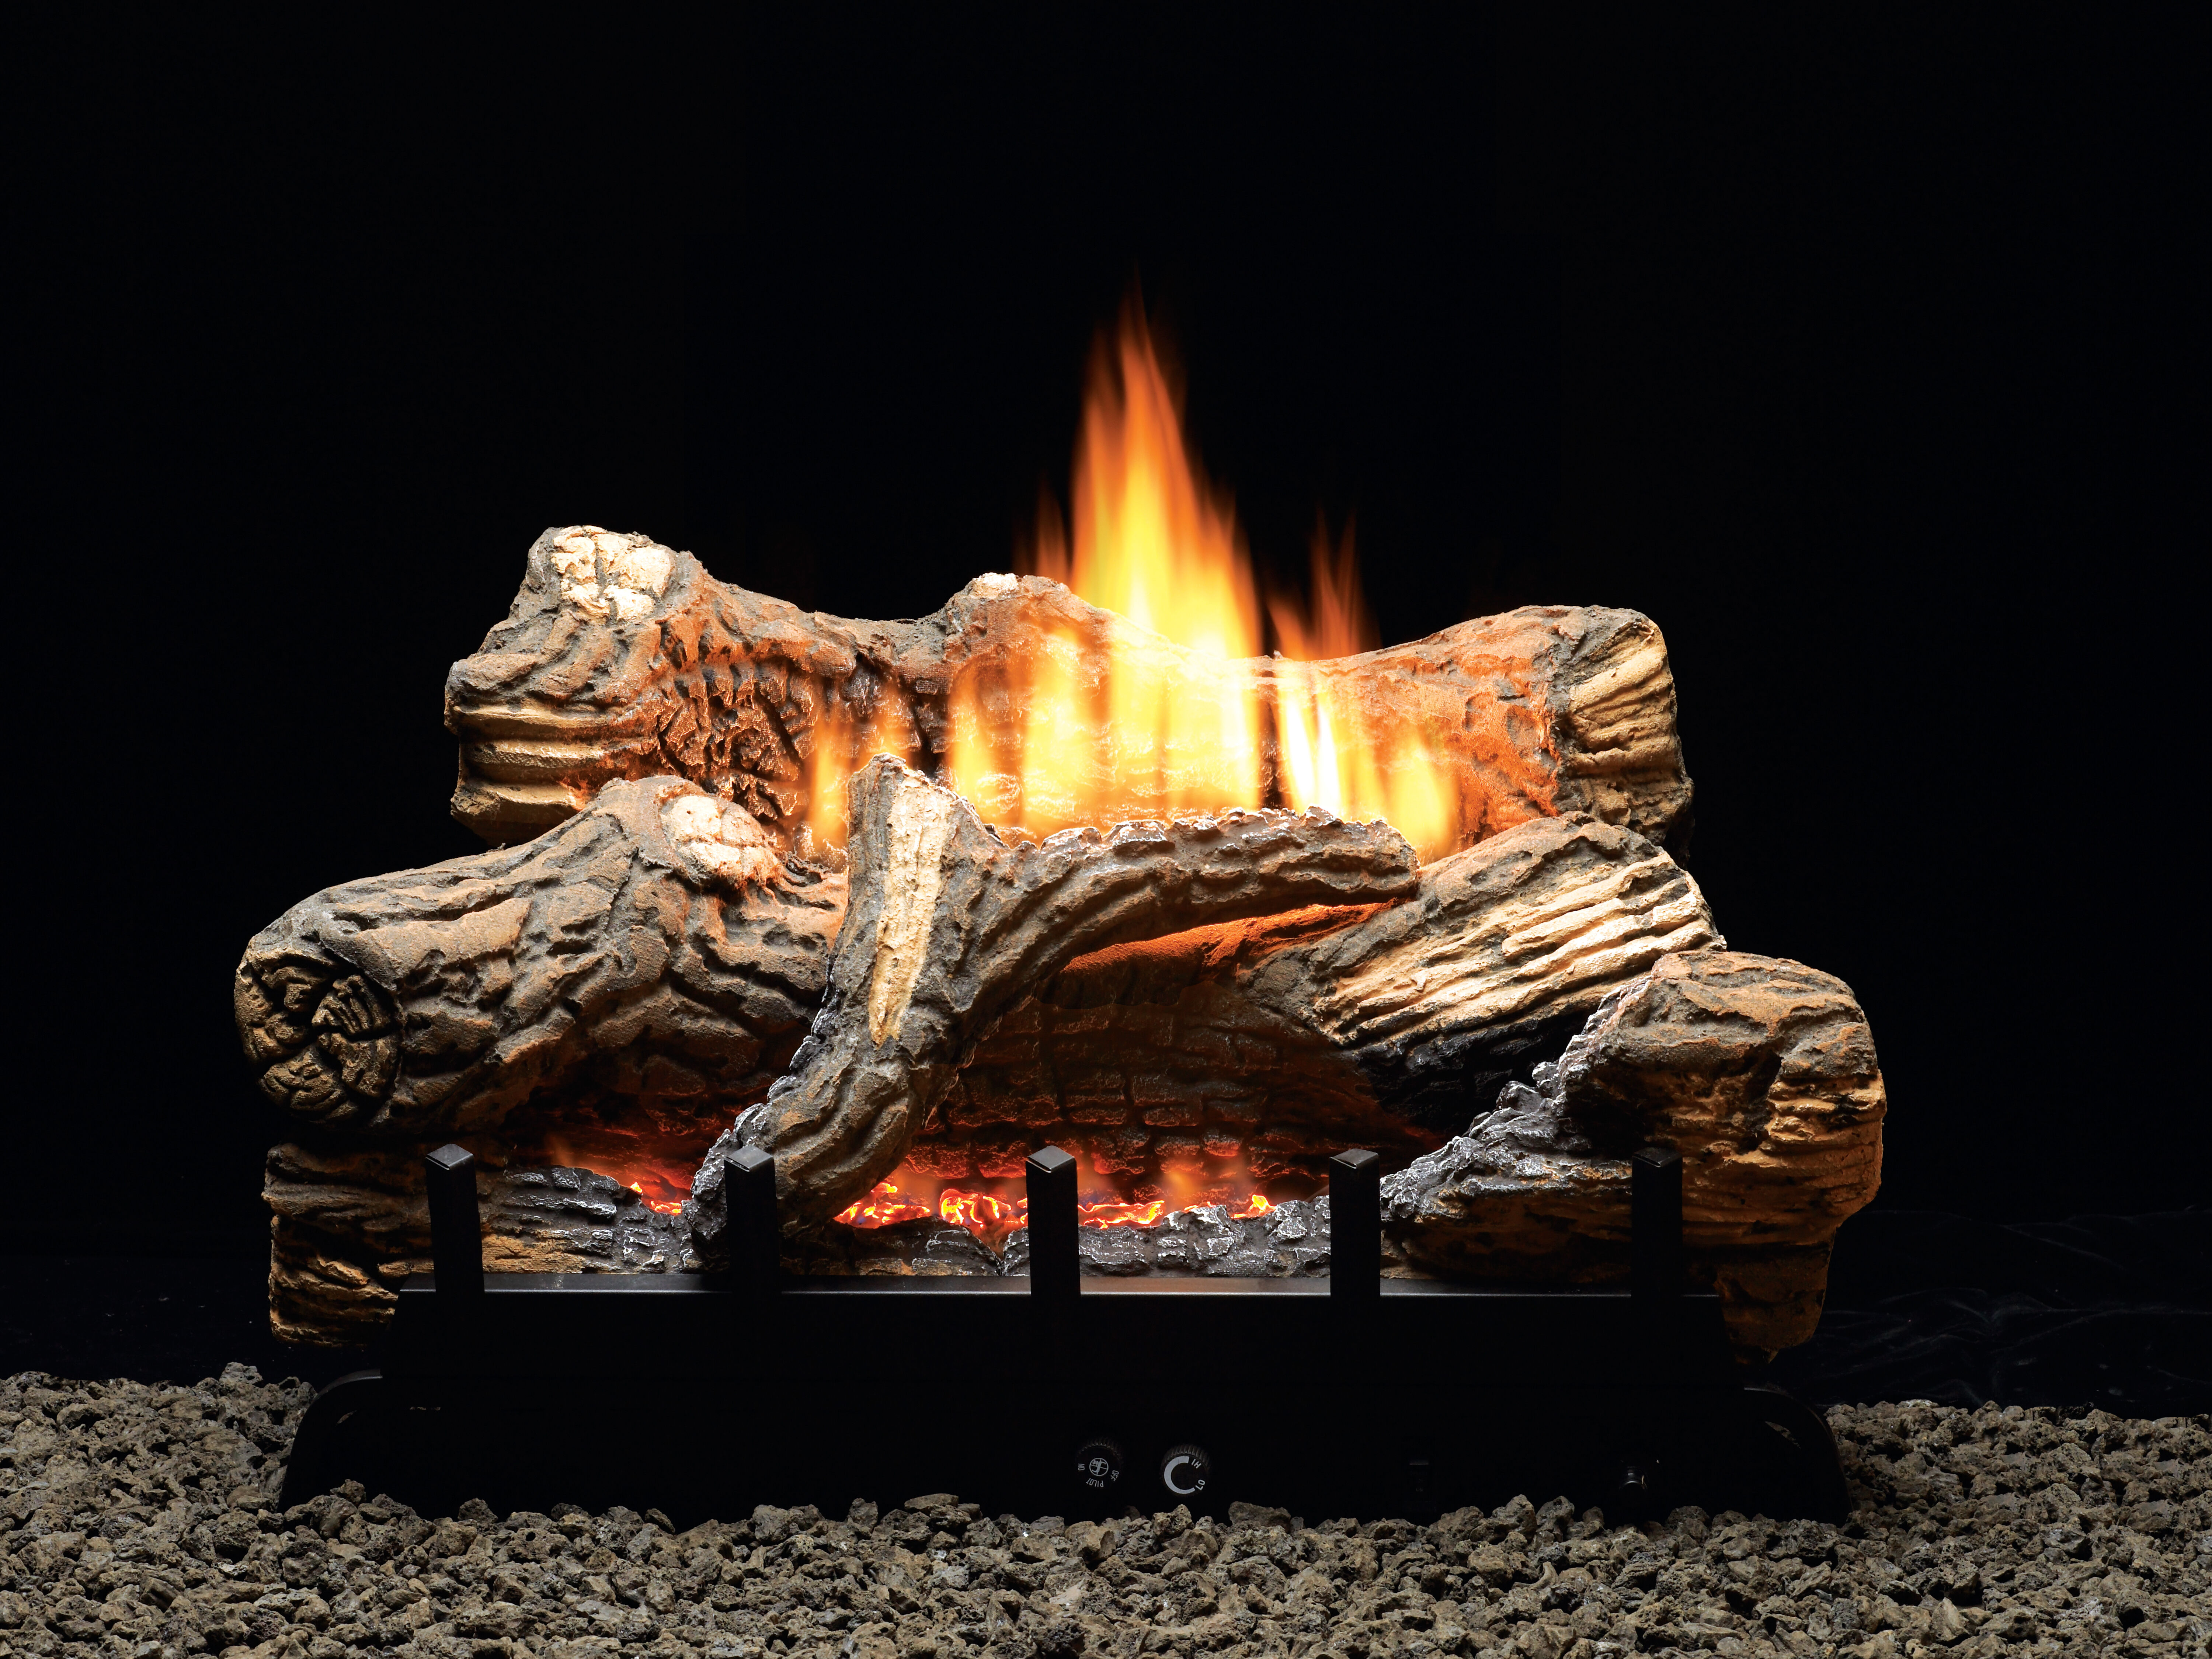 The Flint Hill gas log set by Empire features a rustic finish, a traditional-looking burner system, and adjustable flames.